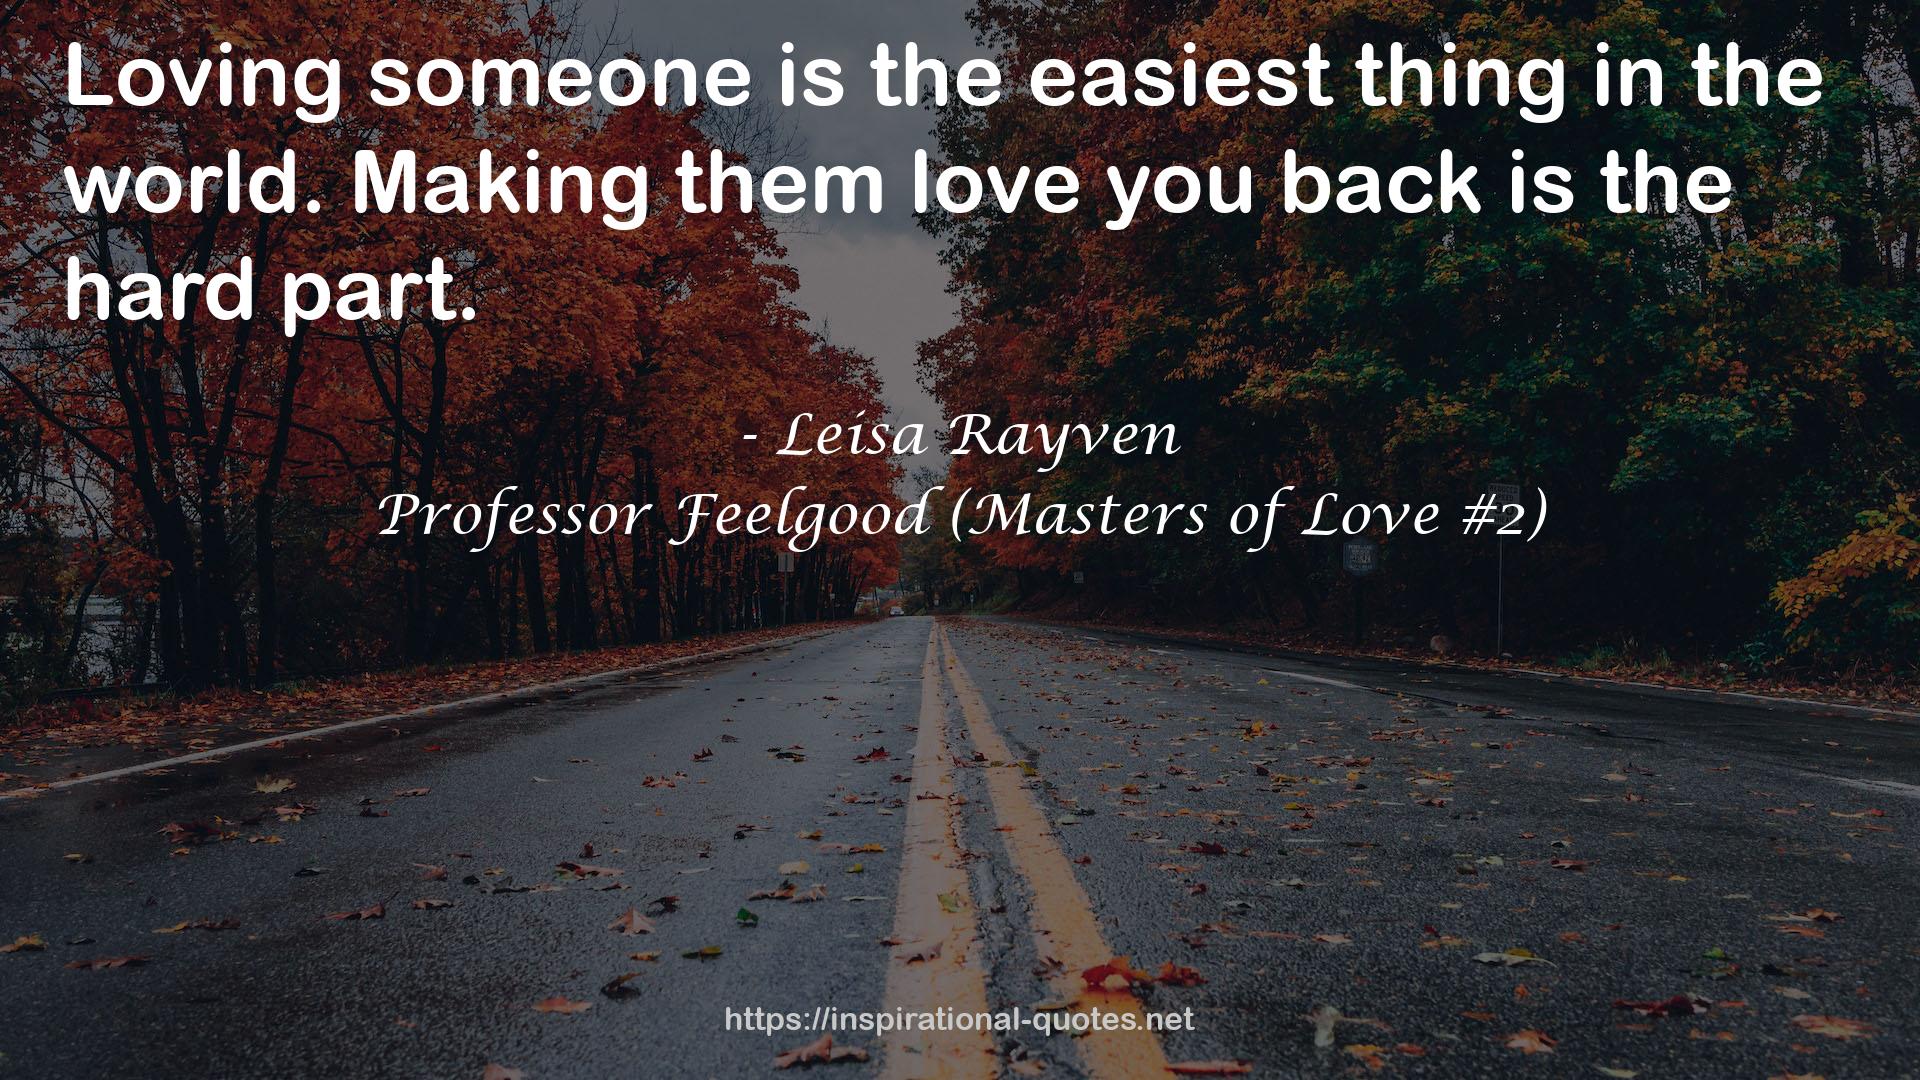 Professor Feelgood (Masters of Love #2) QUOTES